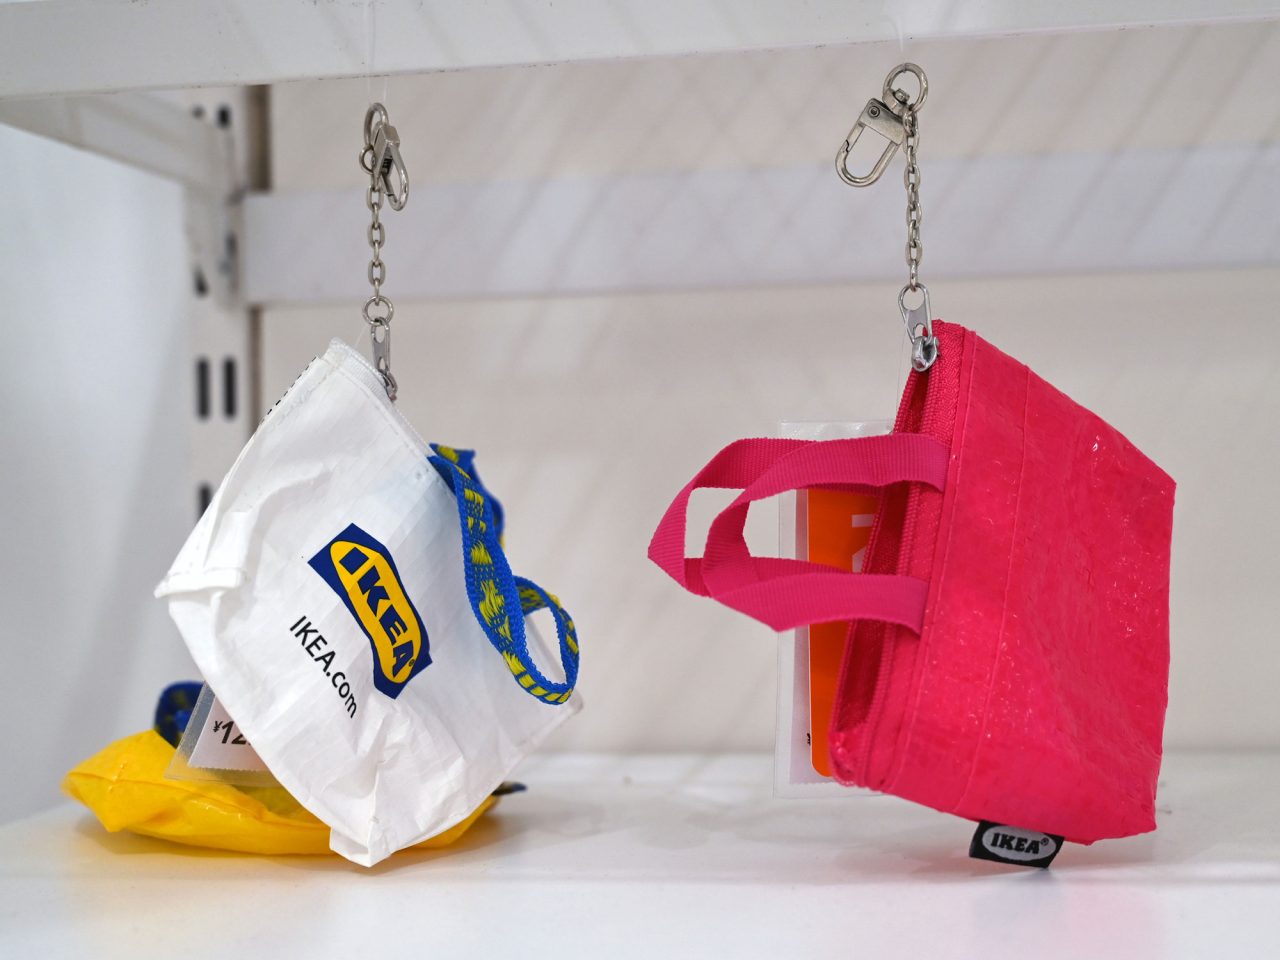 Keychains designed as bags, one yellow, one bright pink, and one white with the text IKEA in blue and yellow.